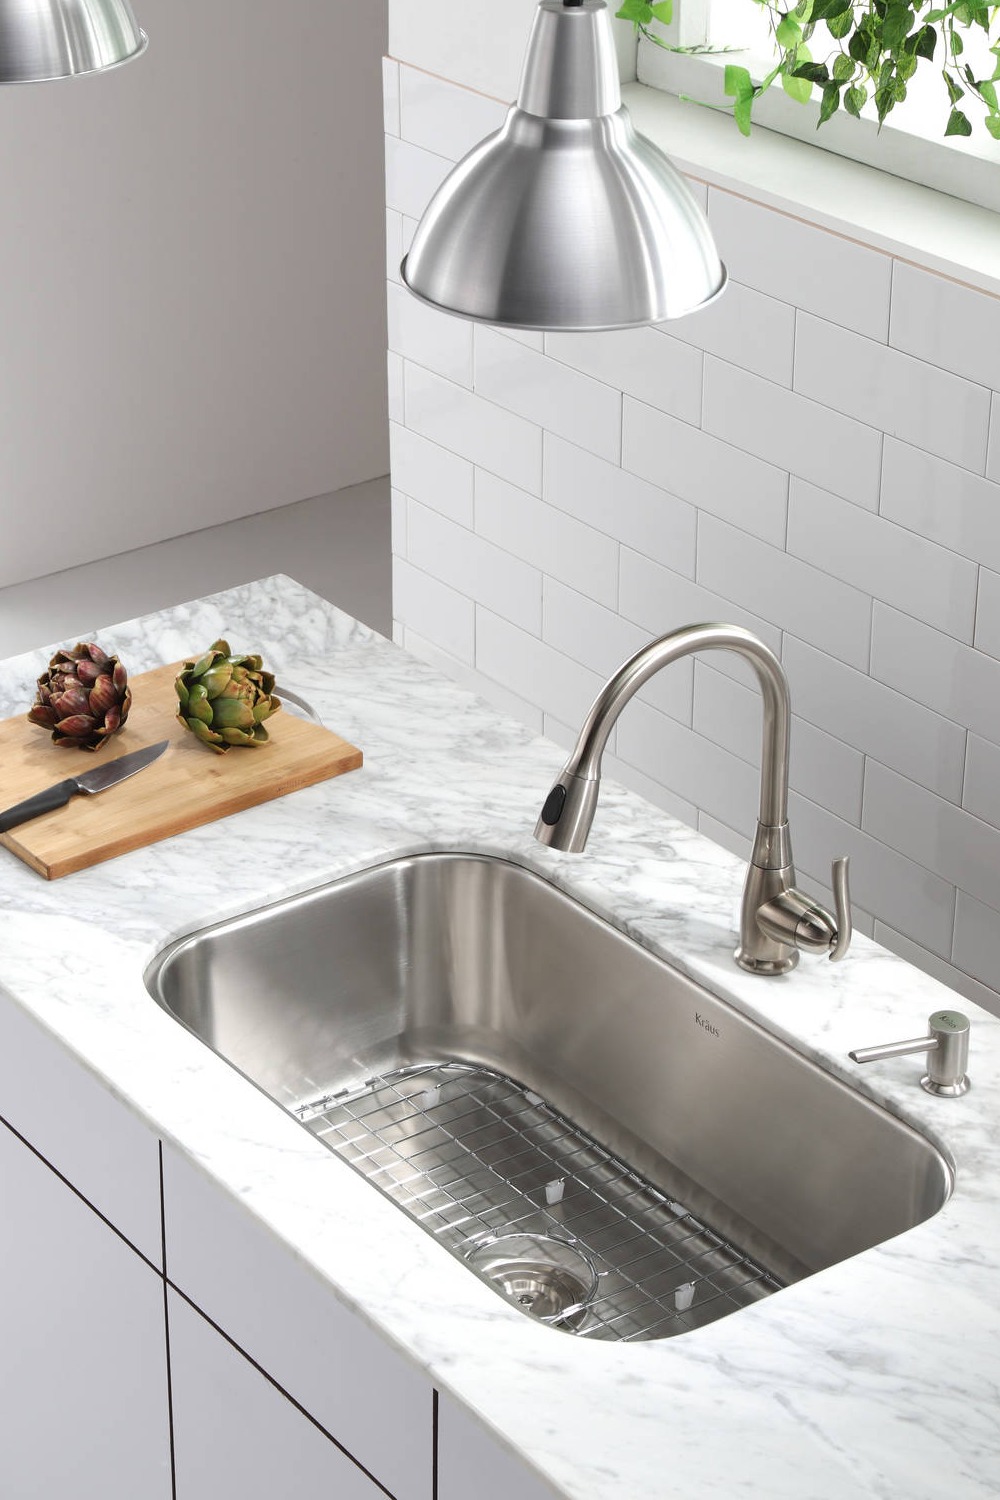 Stainless Steel Kitchen Sinks Basin Marble Countertops Mount Installation Wall Cabinet Install